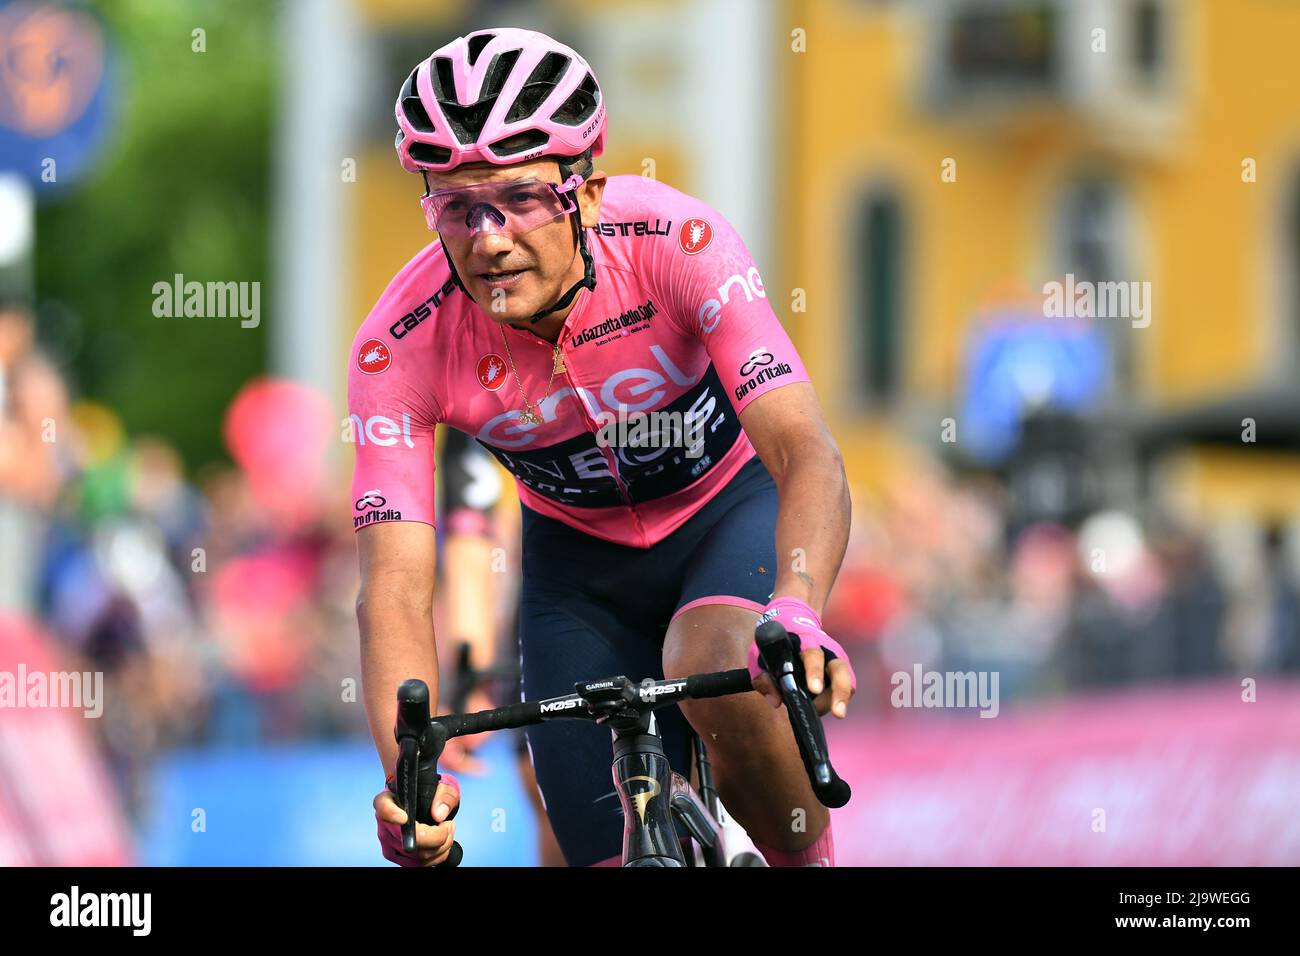 Cycling - Giro d'Italia - Stage 17 - Ponte di Legno to Lavarone, Italy - May 25, 2022 INEOS Grenadiers' Richard Carapaz reacts after stage 17 REUTERS/Jennifer Lorenzini Stock Photo